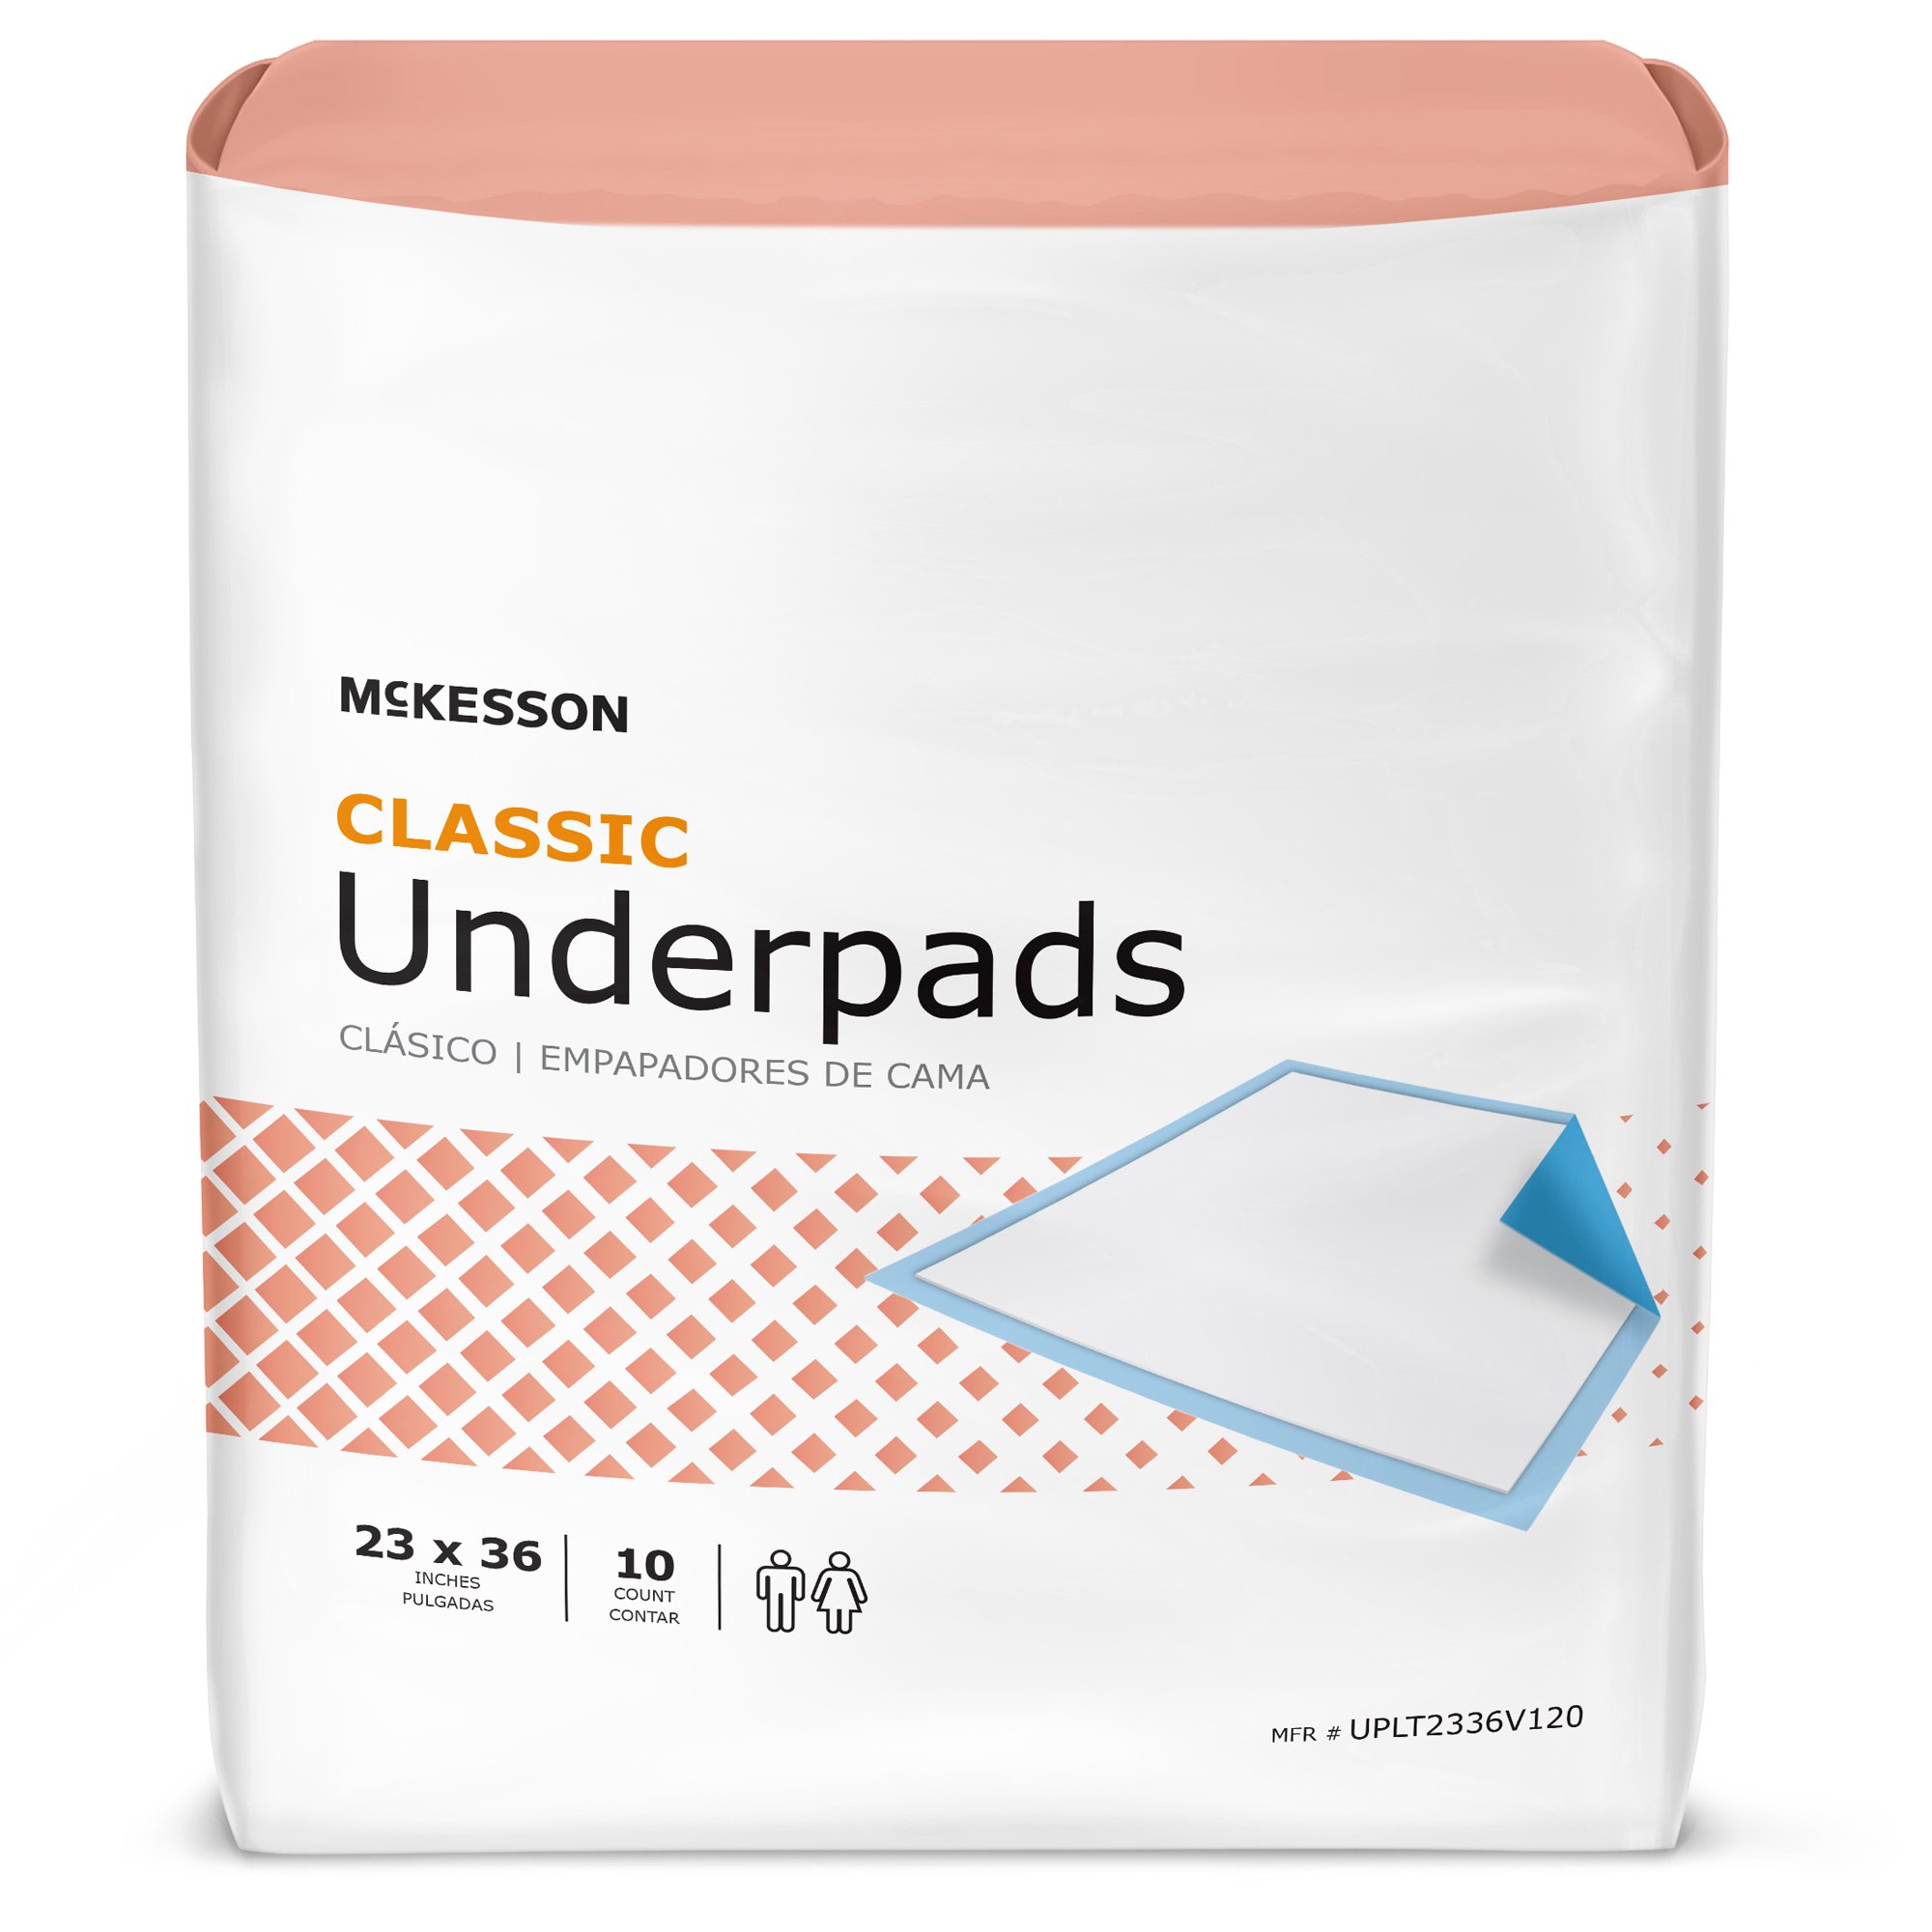 TENA Extra Bariatric Disposable Underpads Polymer 36X36 361 10 pads